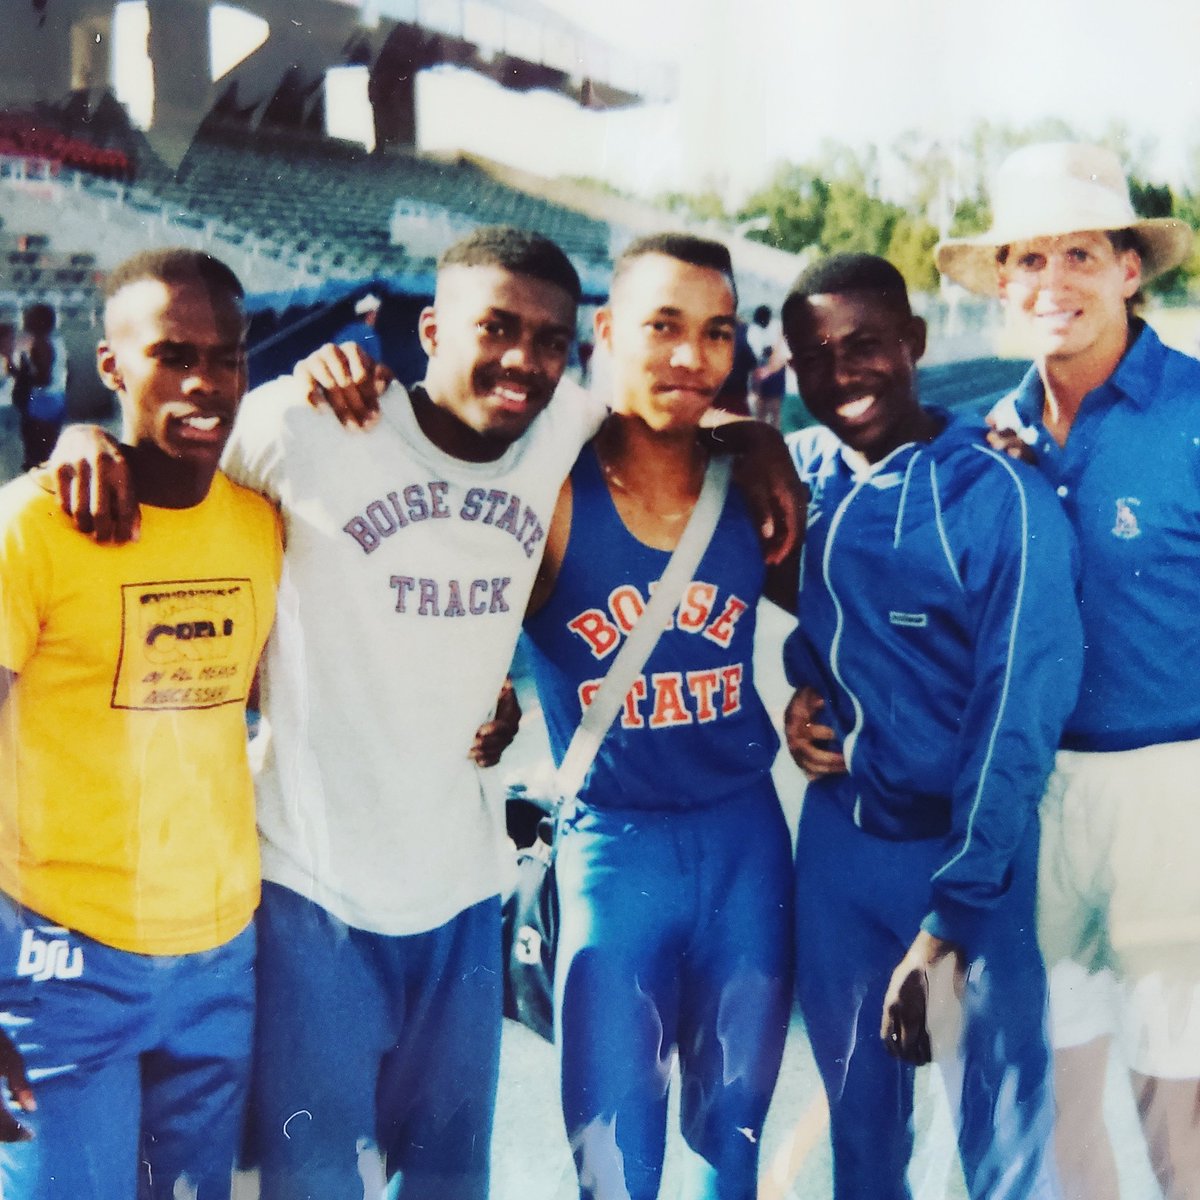 Great memory of me and my #BoiseState track teammates 'unearthed' from back in the late 80s. #boisebroncos #sports